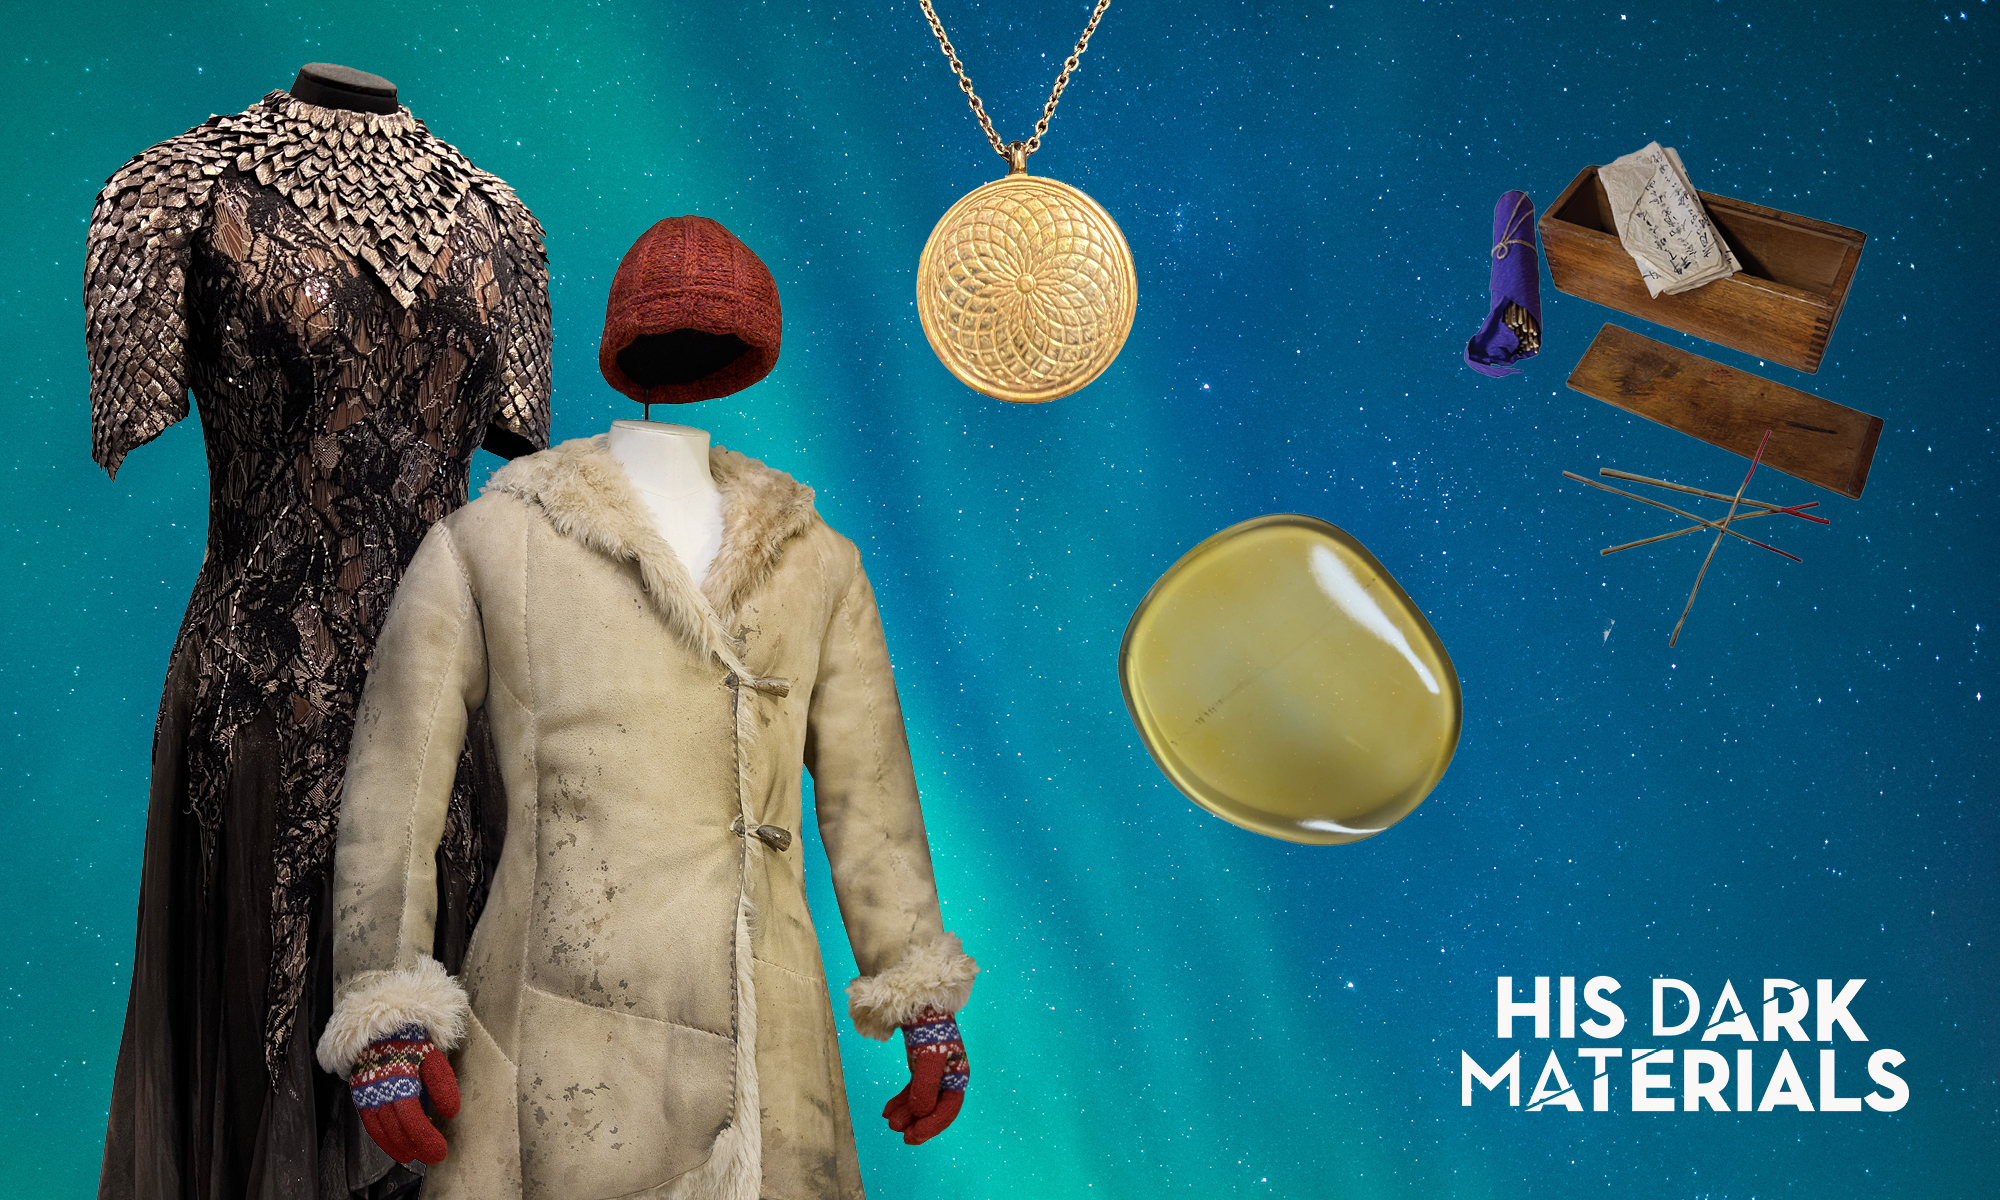 A red knitted hat suspended above a tanned hide coat on a mannequin with overlay text saying: His Dark Materials, Find props from the BBC?HBO series among the Pitt Rivers Museum's famous displays